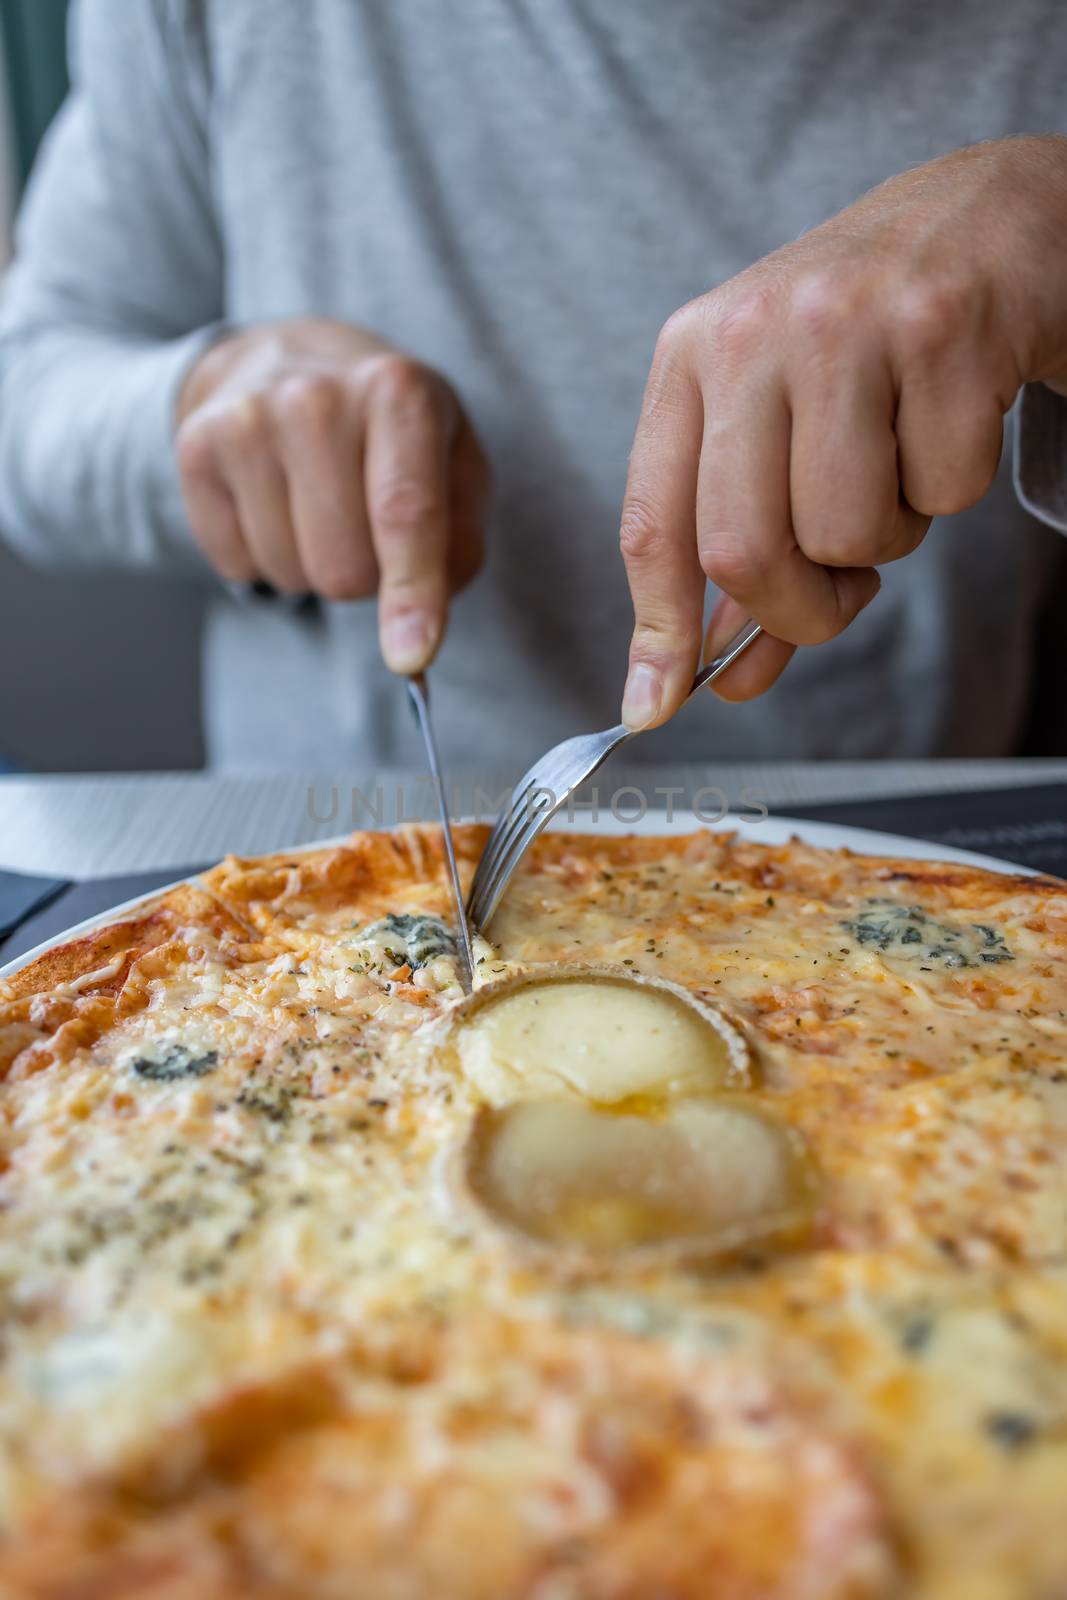 Man's hands cut a piece of cheesy pizza in the restaurant